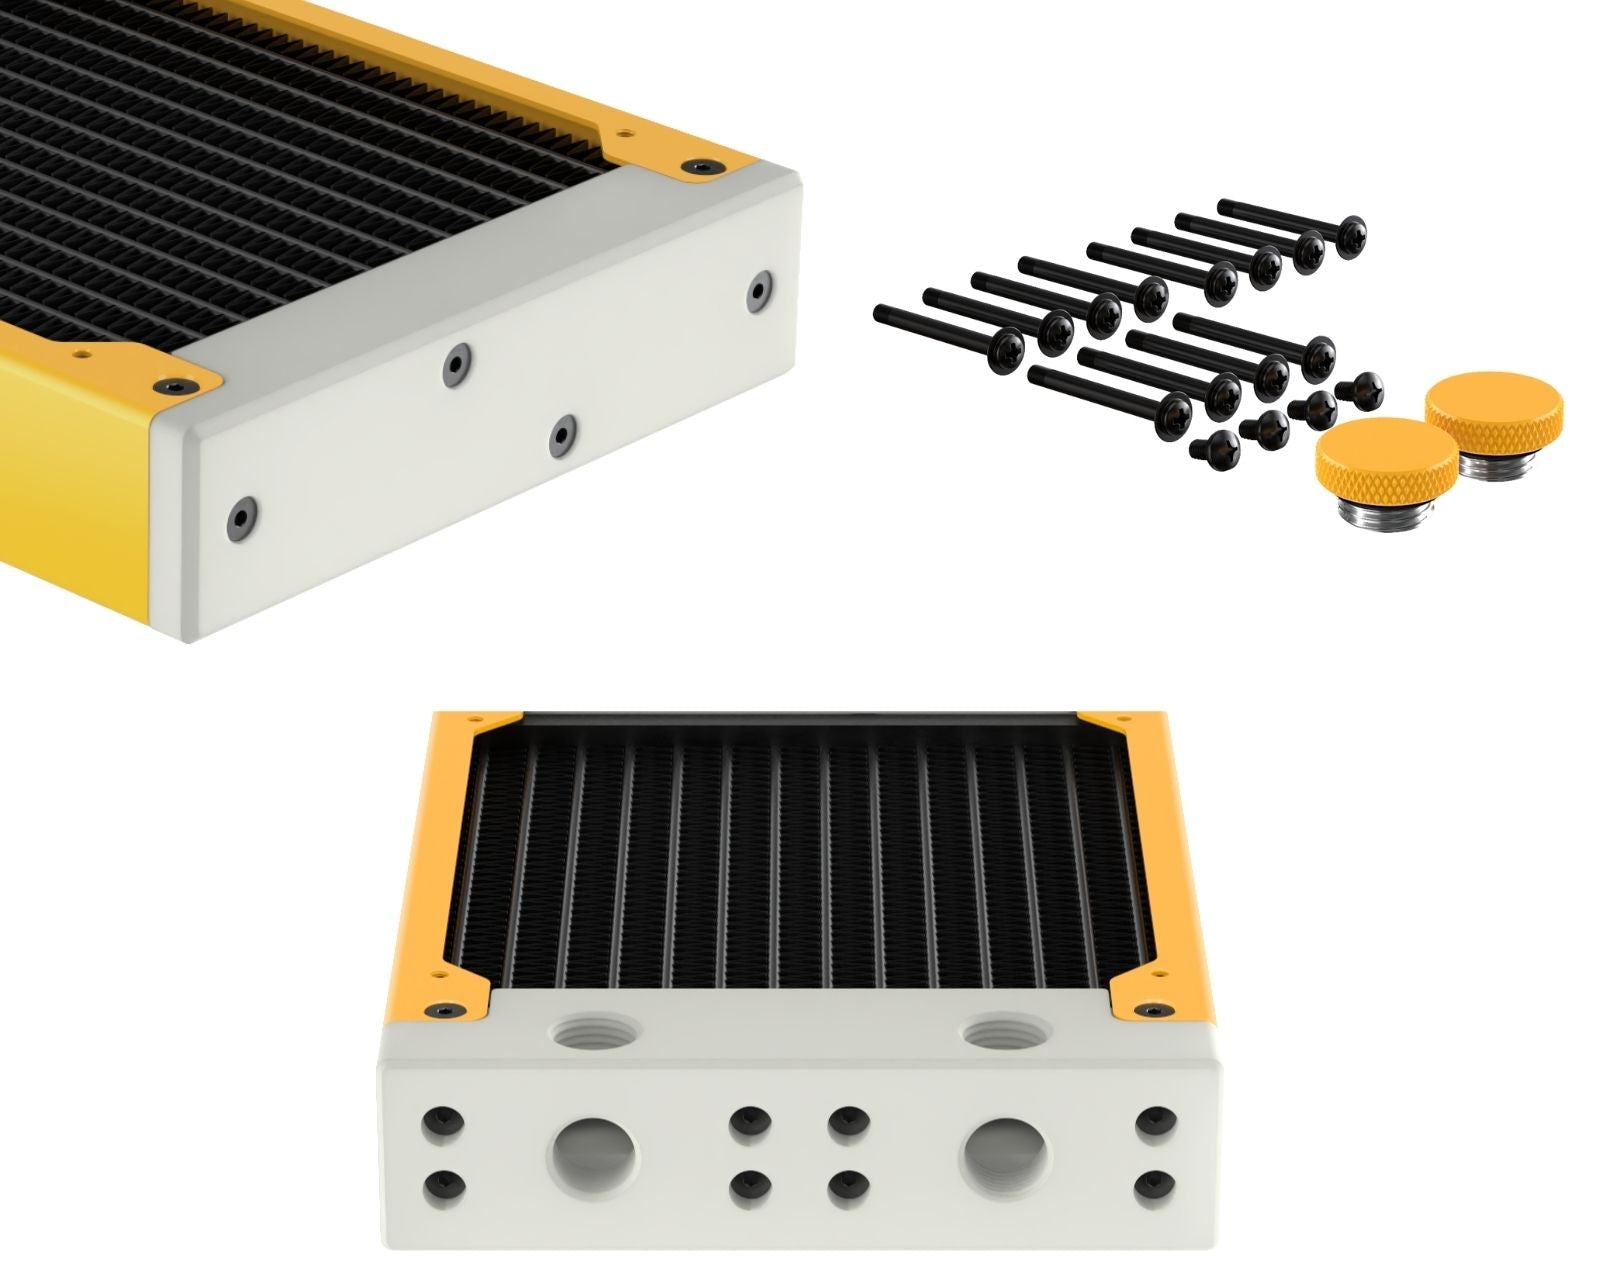 PrimoChill 360SL (30mm) EXIMO Modular Radiator, White POM, 3x120mm, Triple Fan (R-SL-W36) Available in 20+ Colors, Assembled in USA and Custom Watercooling Loop Ready - Yellow